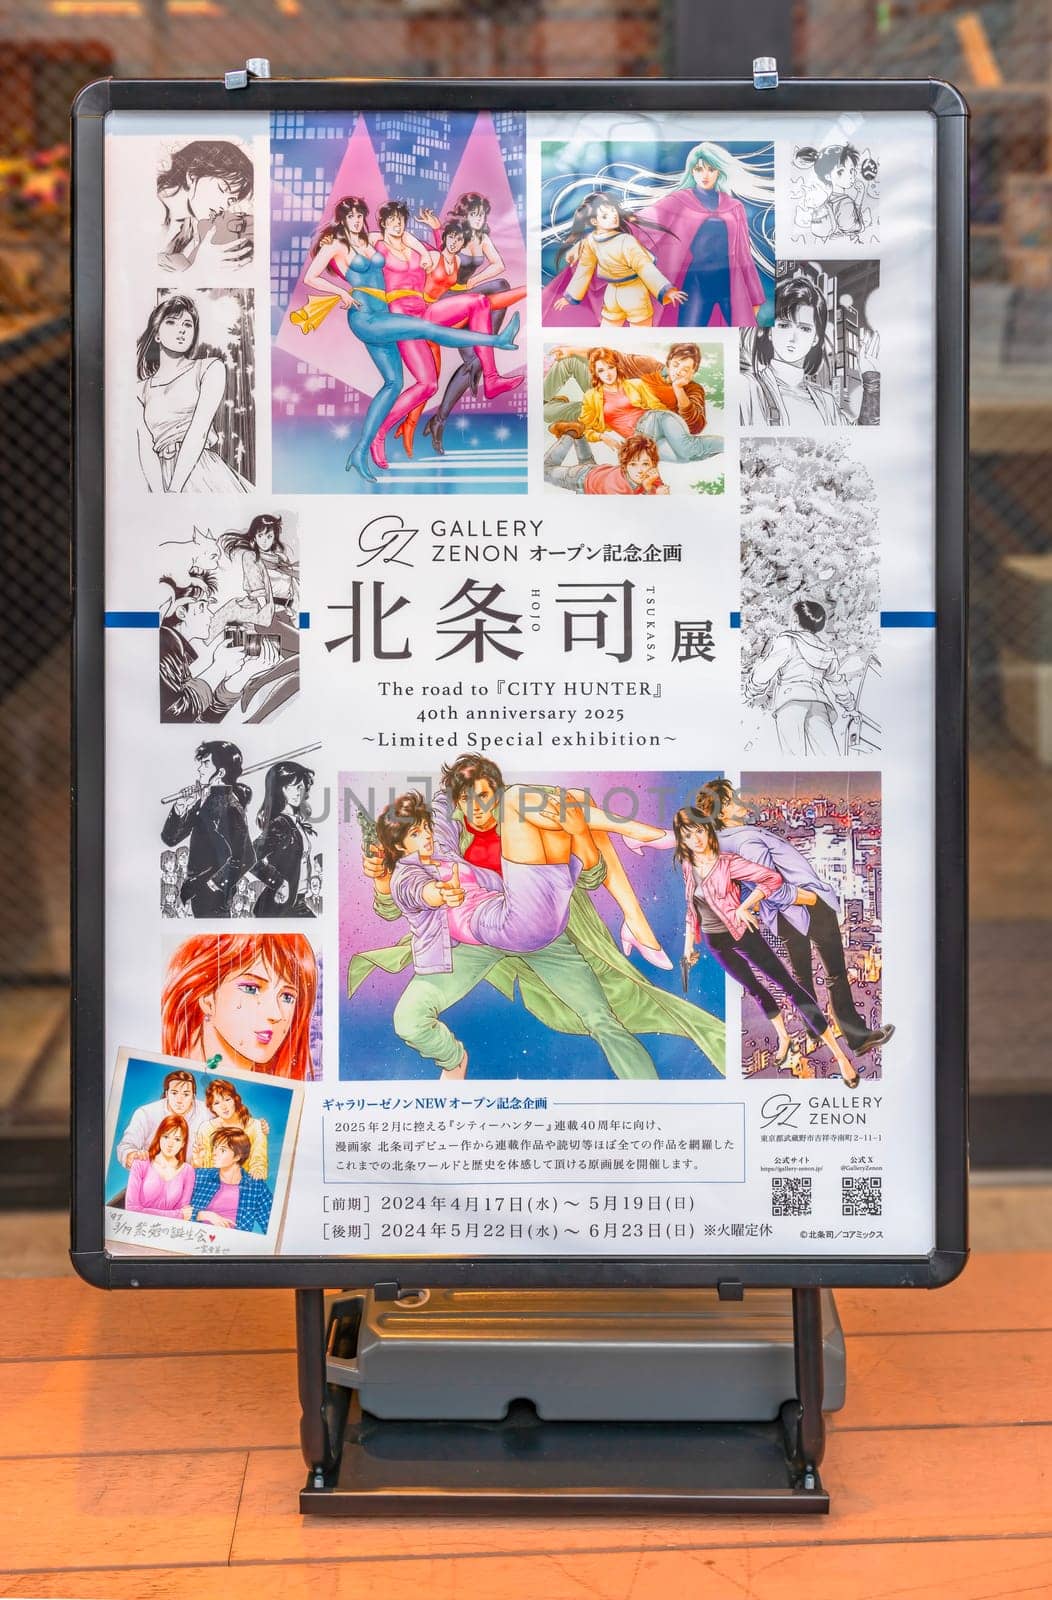 Poster of the Tsukasa Hojo 40th anniversary 2025 exhibition "The Road to City Hunter". by kuremo